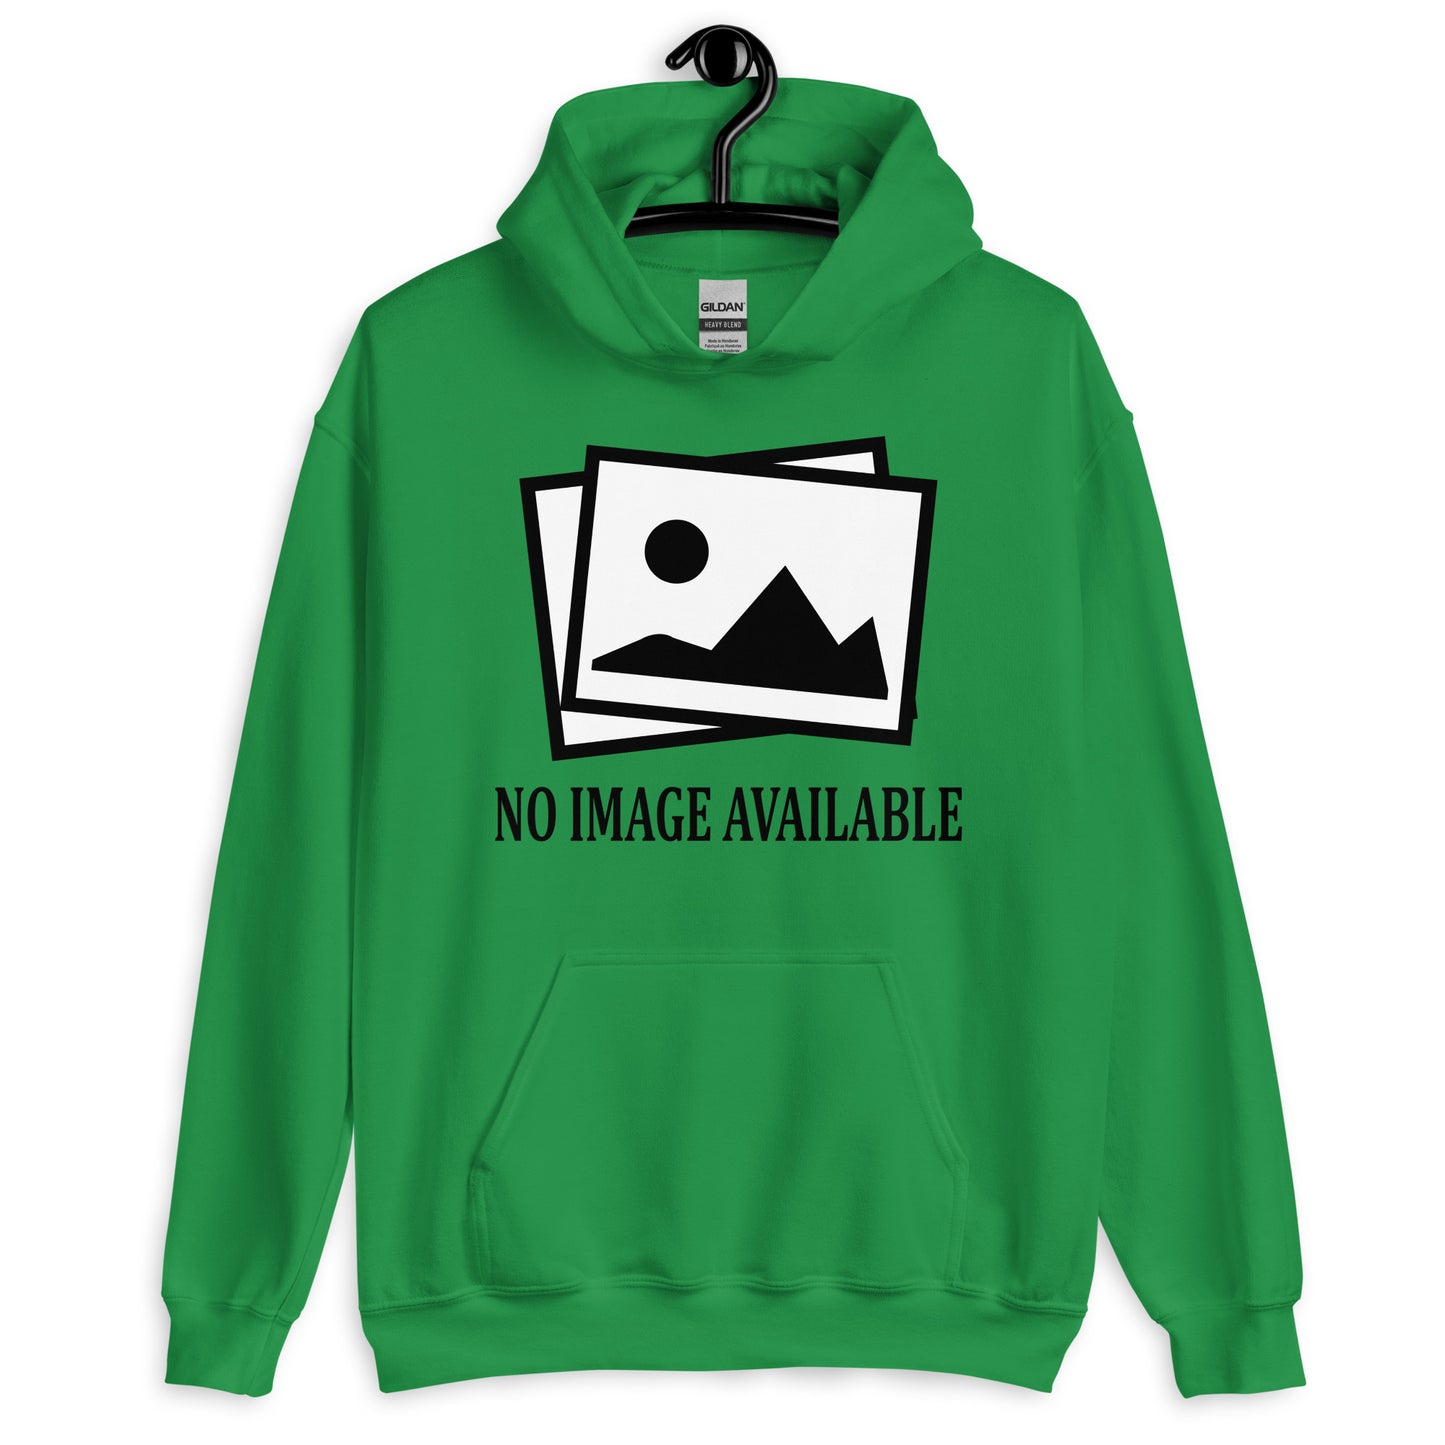 Irish green hoodie with image and text "no image available"